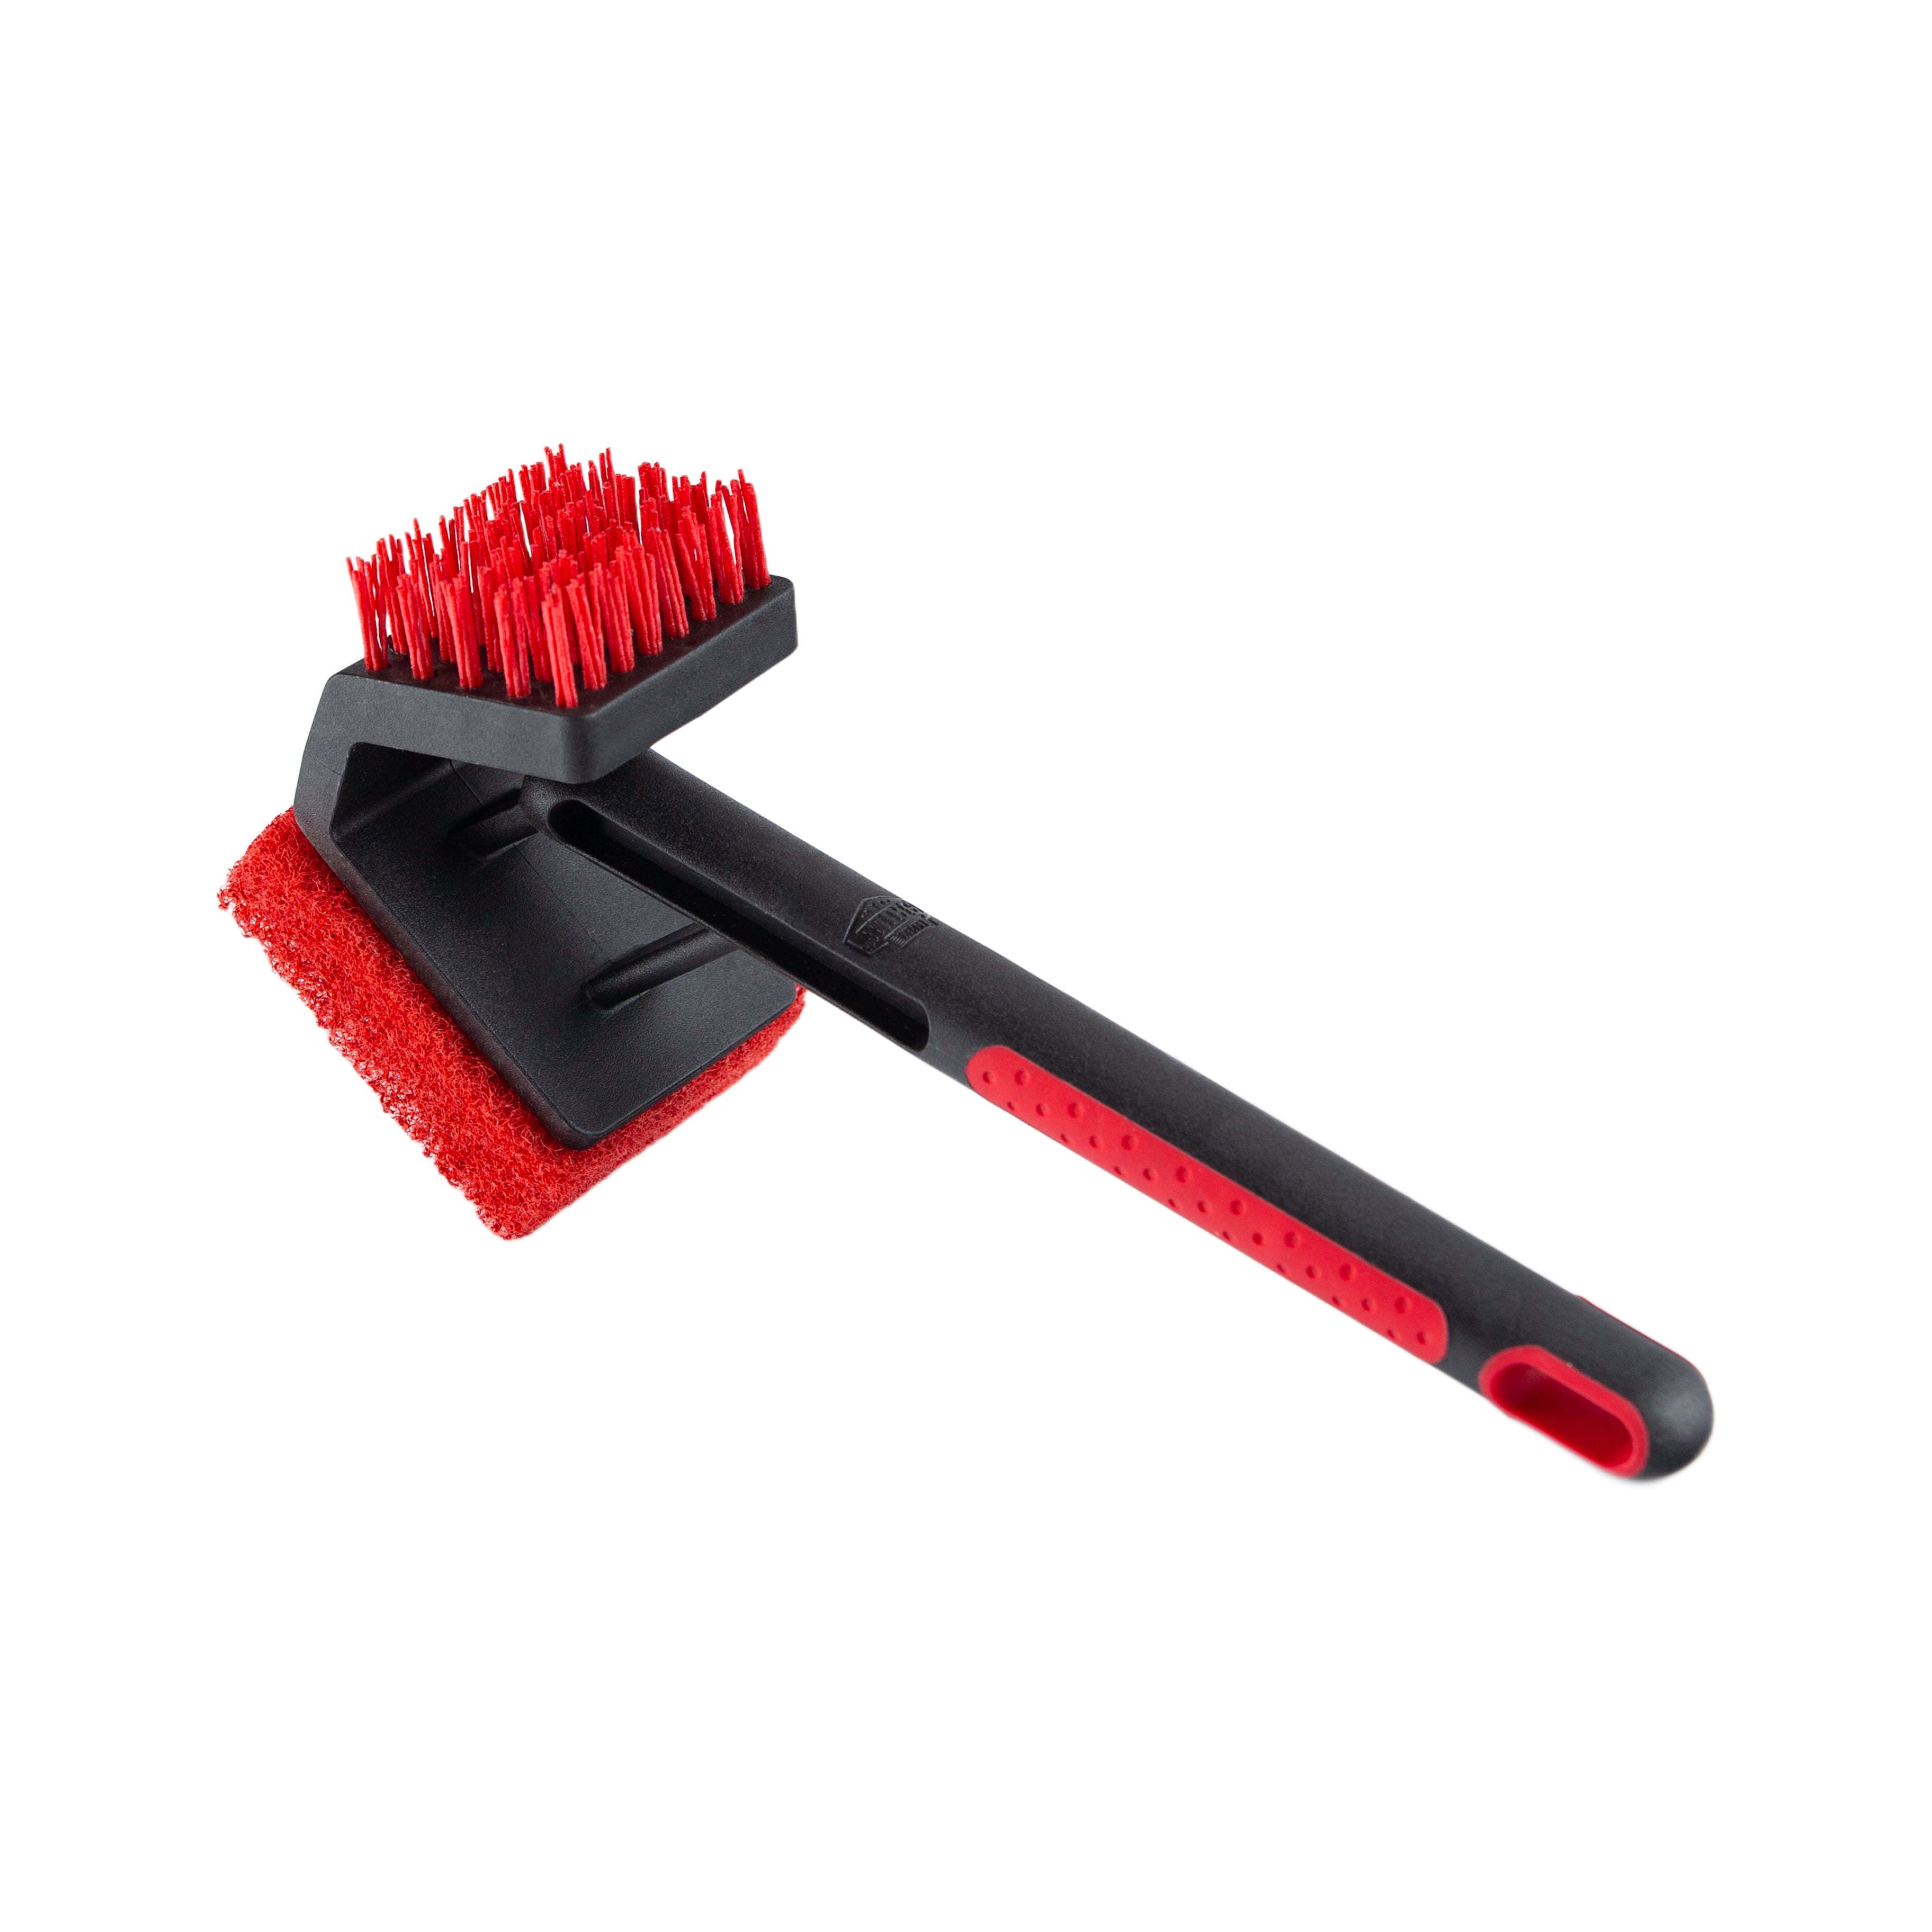 Safe & Small Grill Cleaning Brush Kit – Non-Scratch Safe Brush